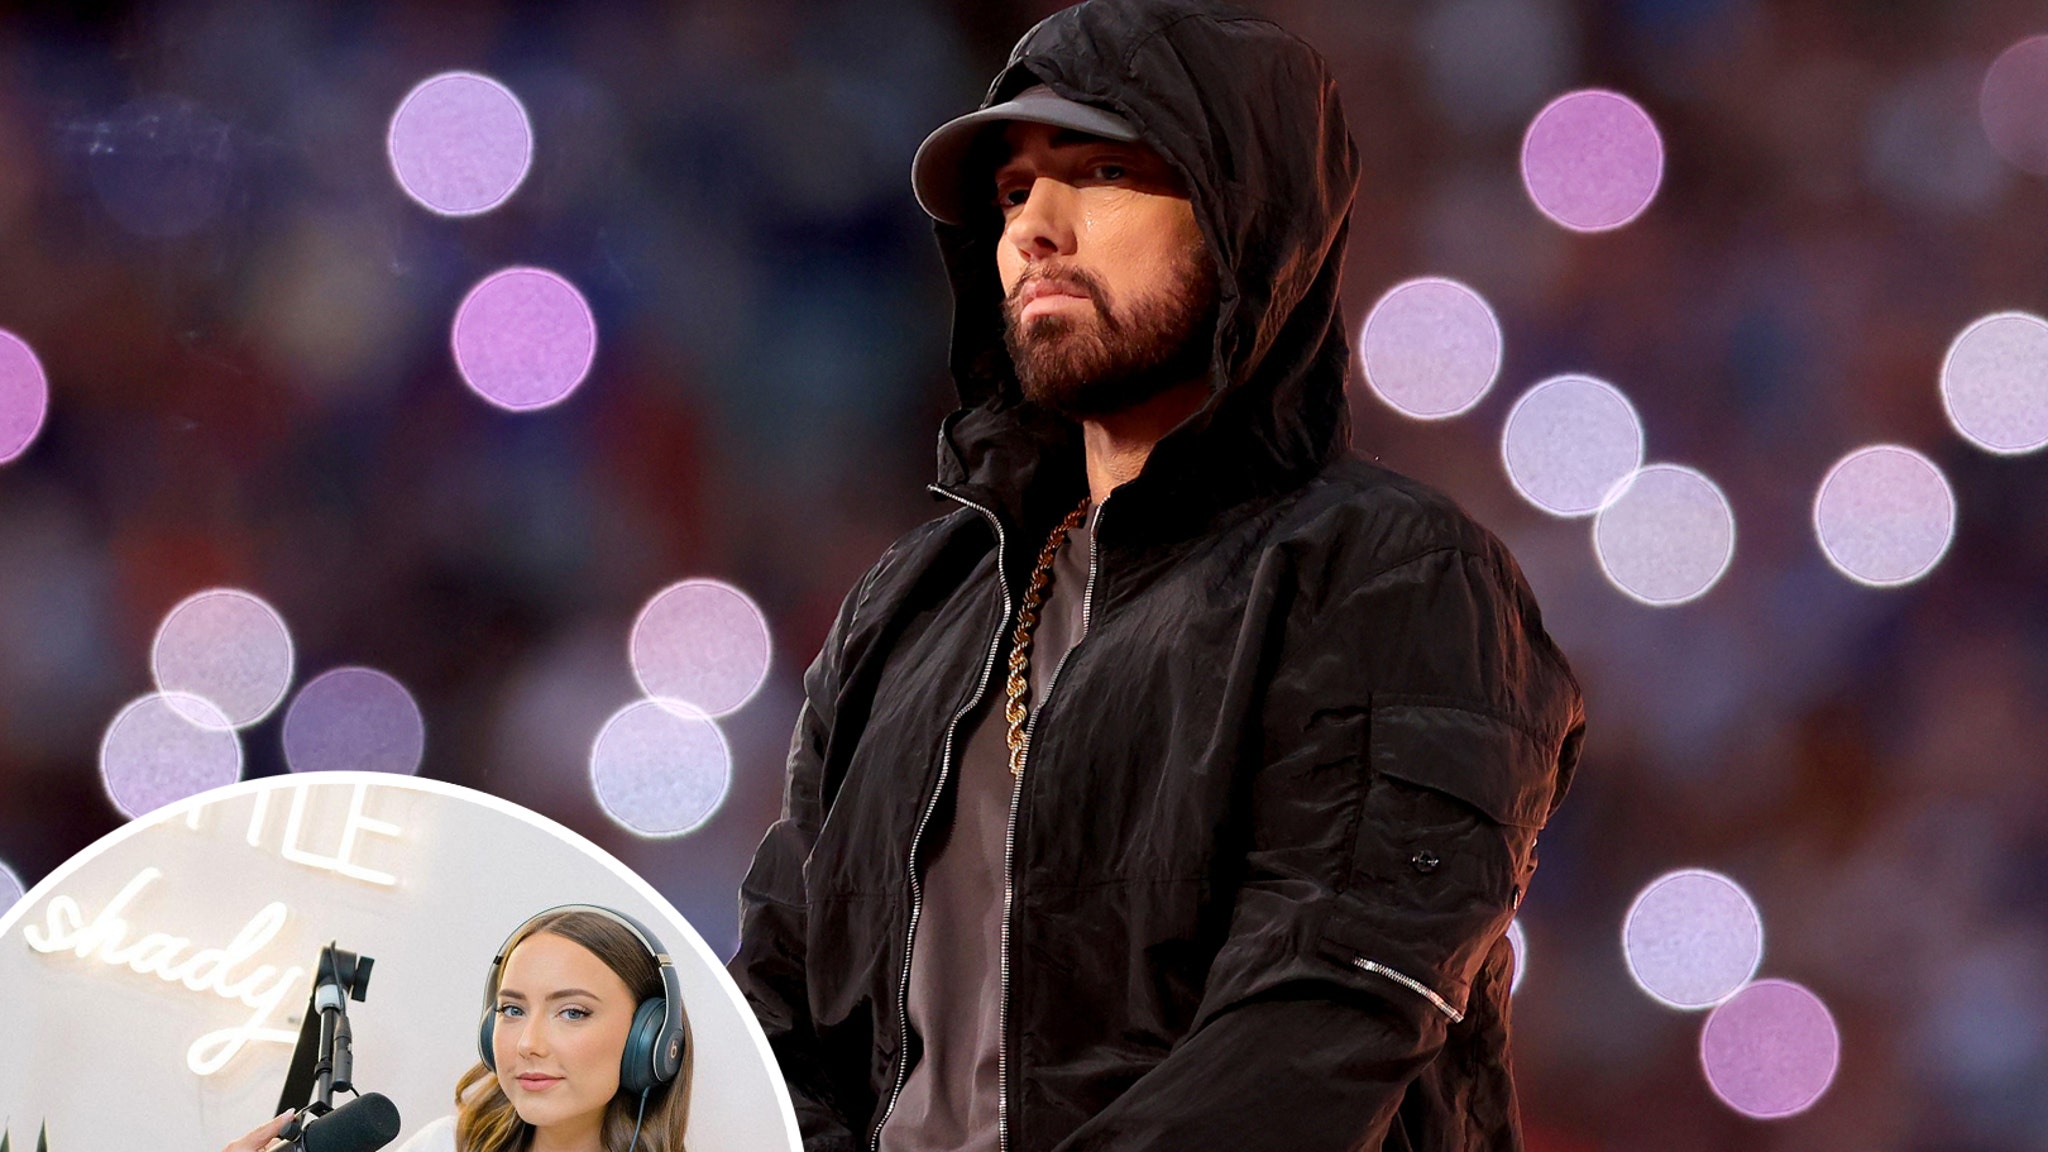 Eminem's Daughter Hailie Jade Launches Podcast, Gives Rare Insight Into 'Surreal' Childhood